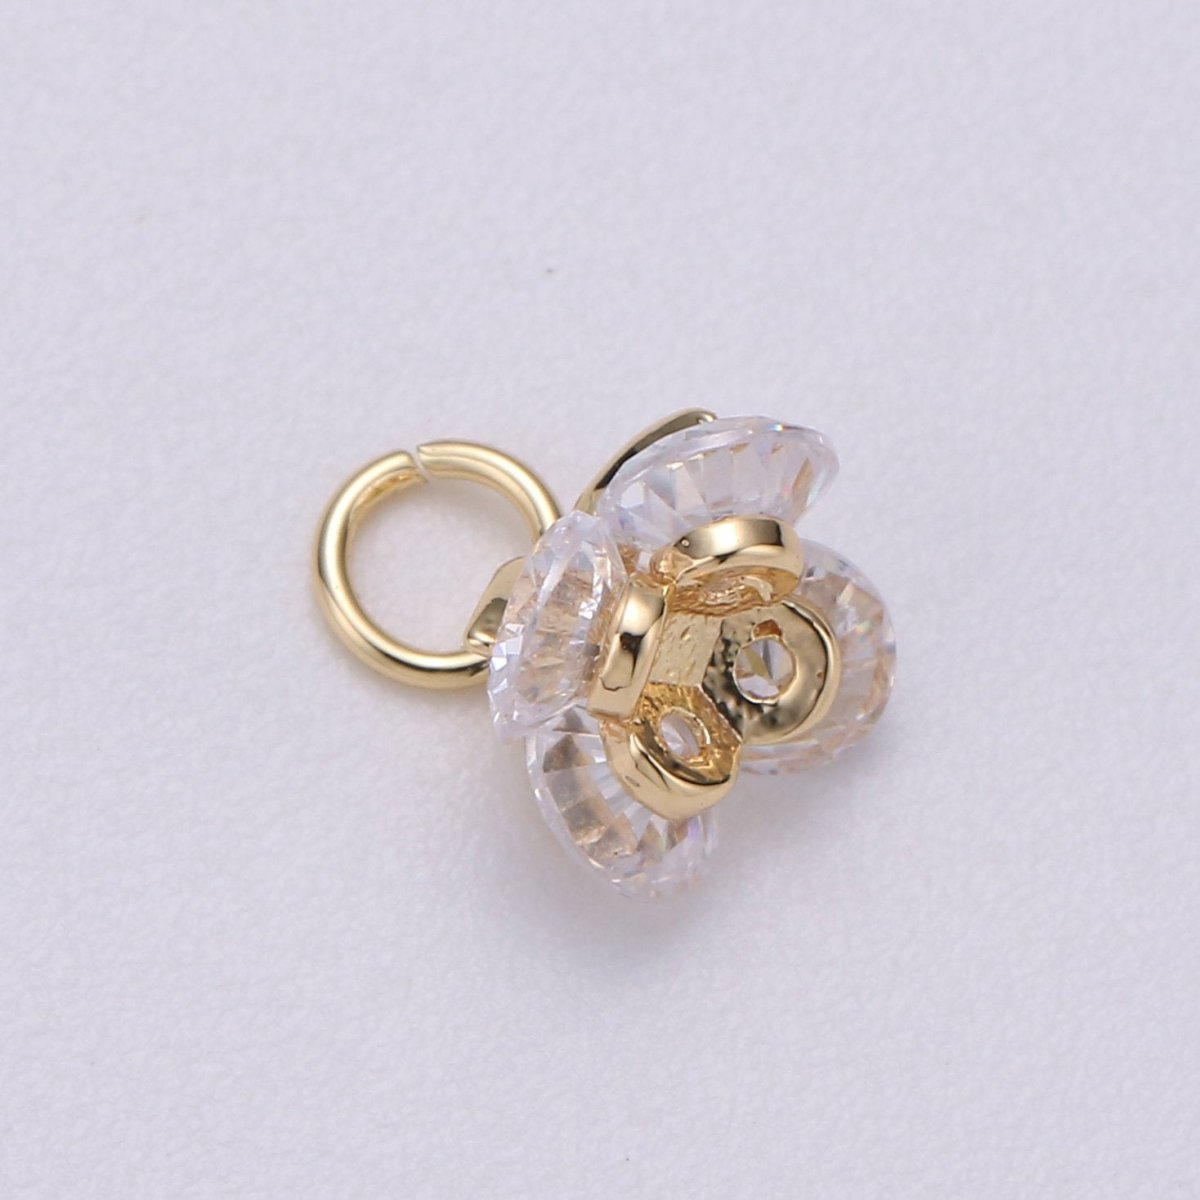 18k Gold Filled Dainty Tiny Small Flower Charm with CZ stone for Bracelet, Necklace, Earring MakingC-419 - DLUXCA